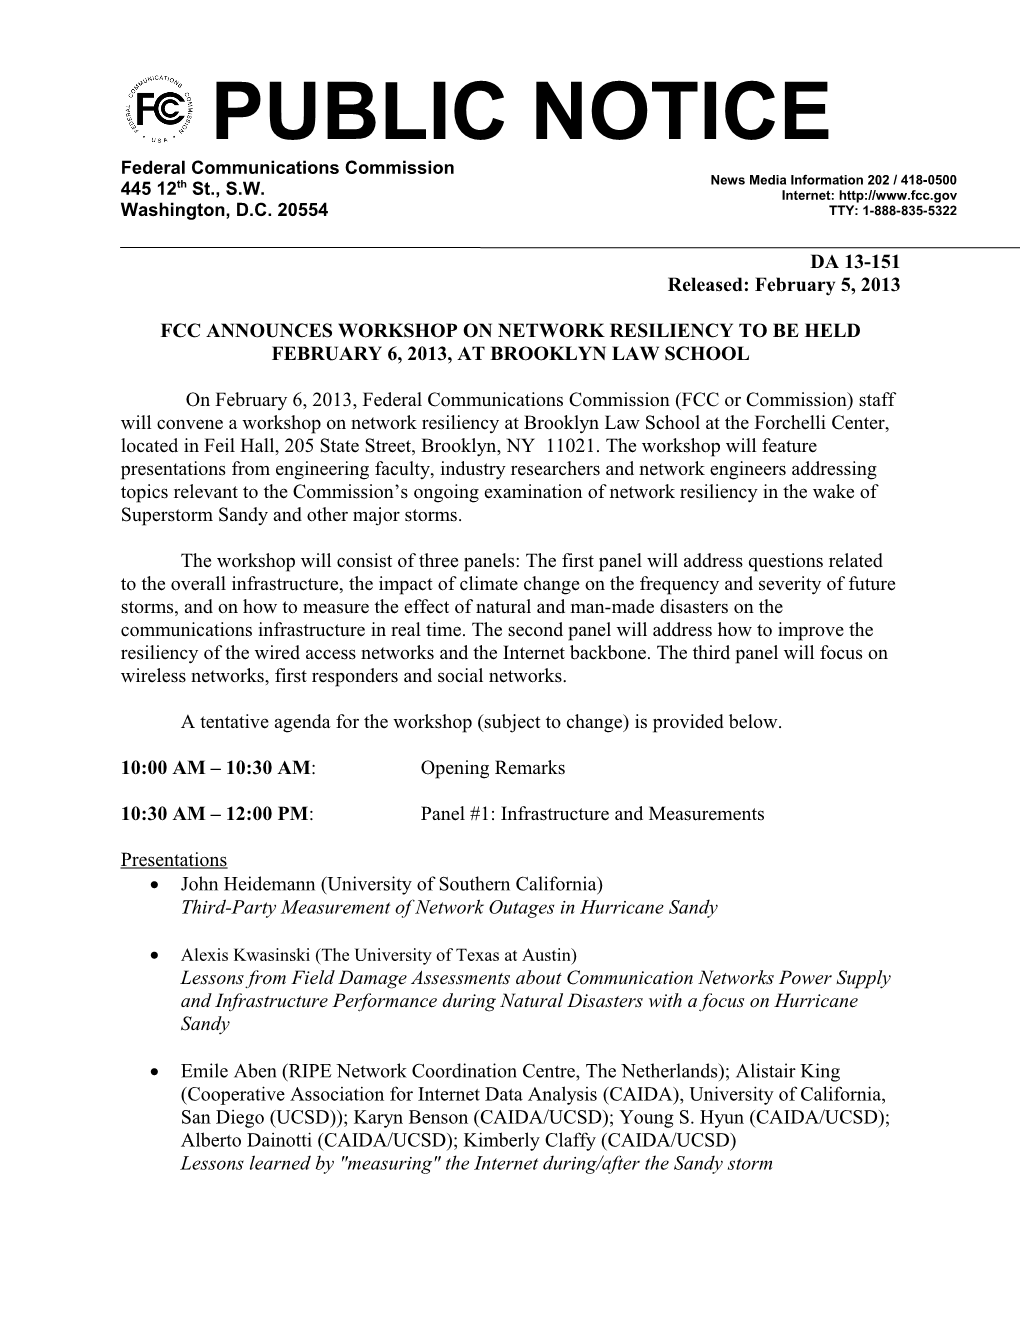 Fcc Announces Workshop on Network Resiliency to Be Held February 6, 2013, at Brooklyn